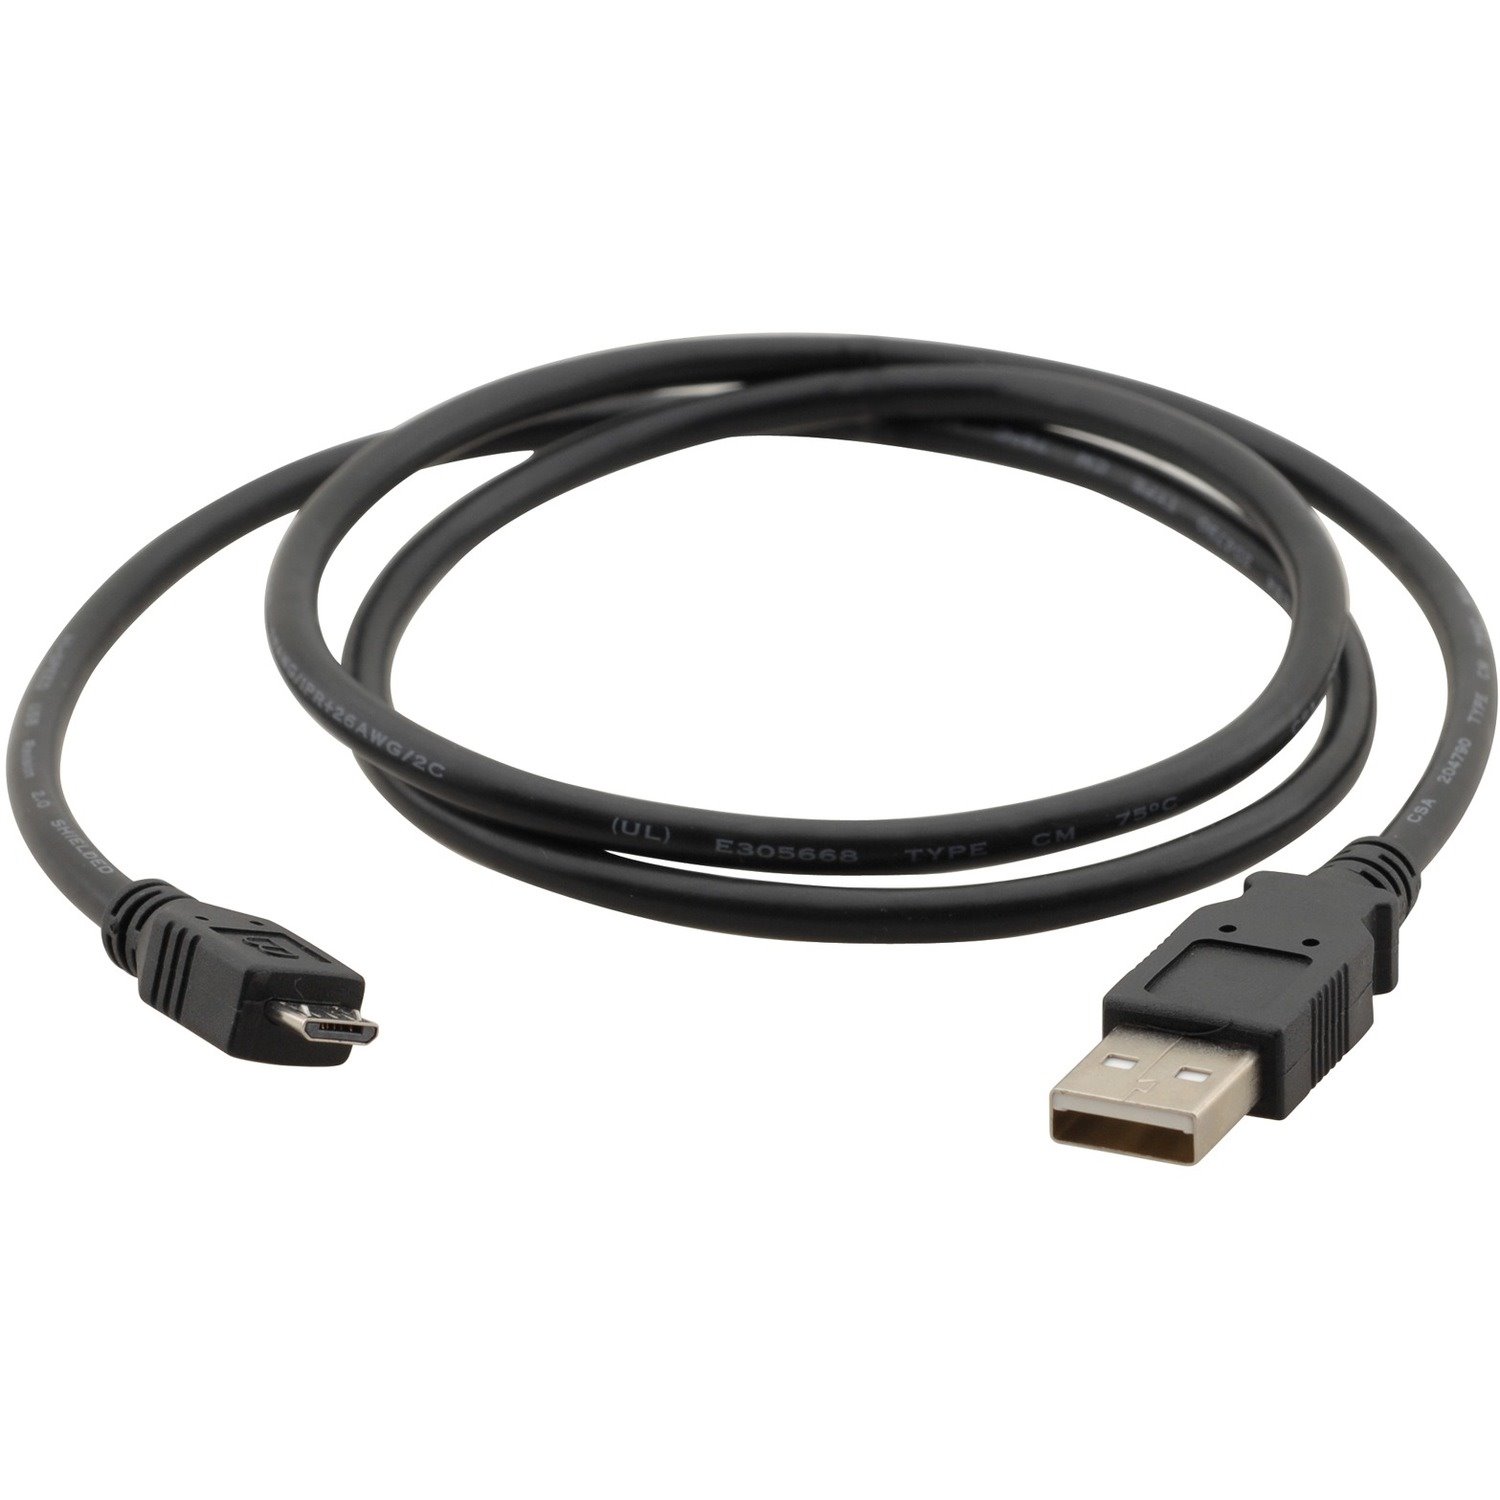 Kramer USB-A to USB Micro-B 2.0 Cable